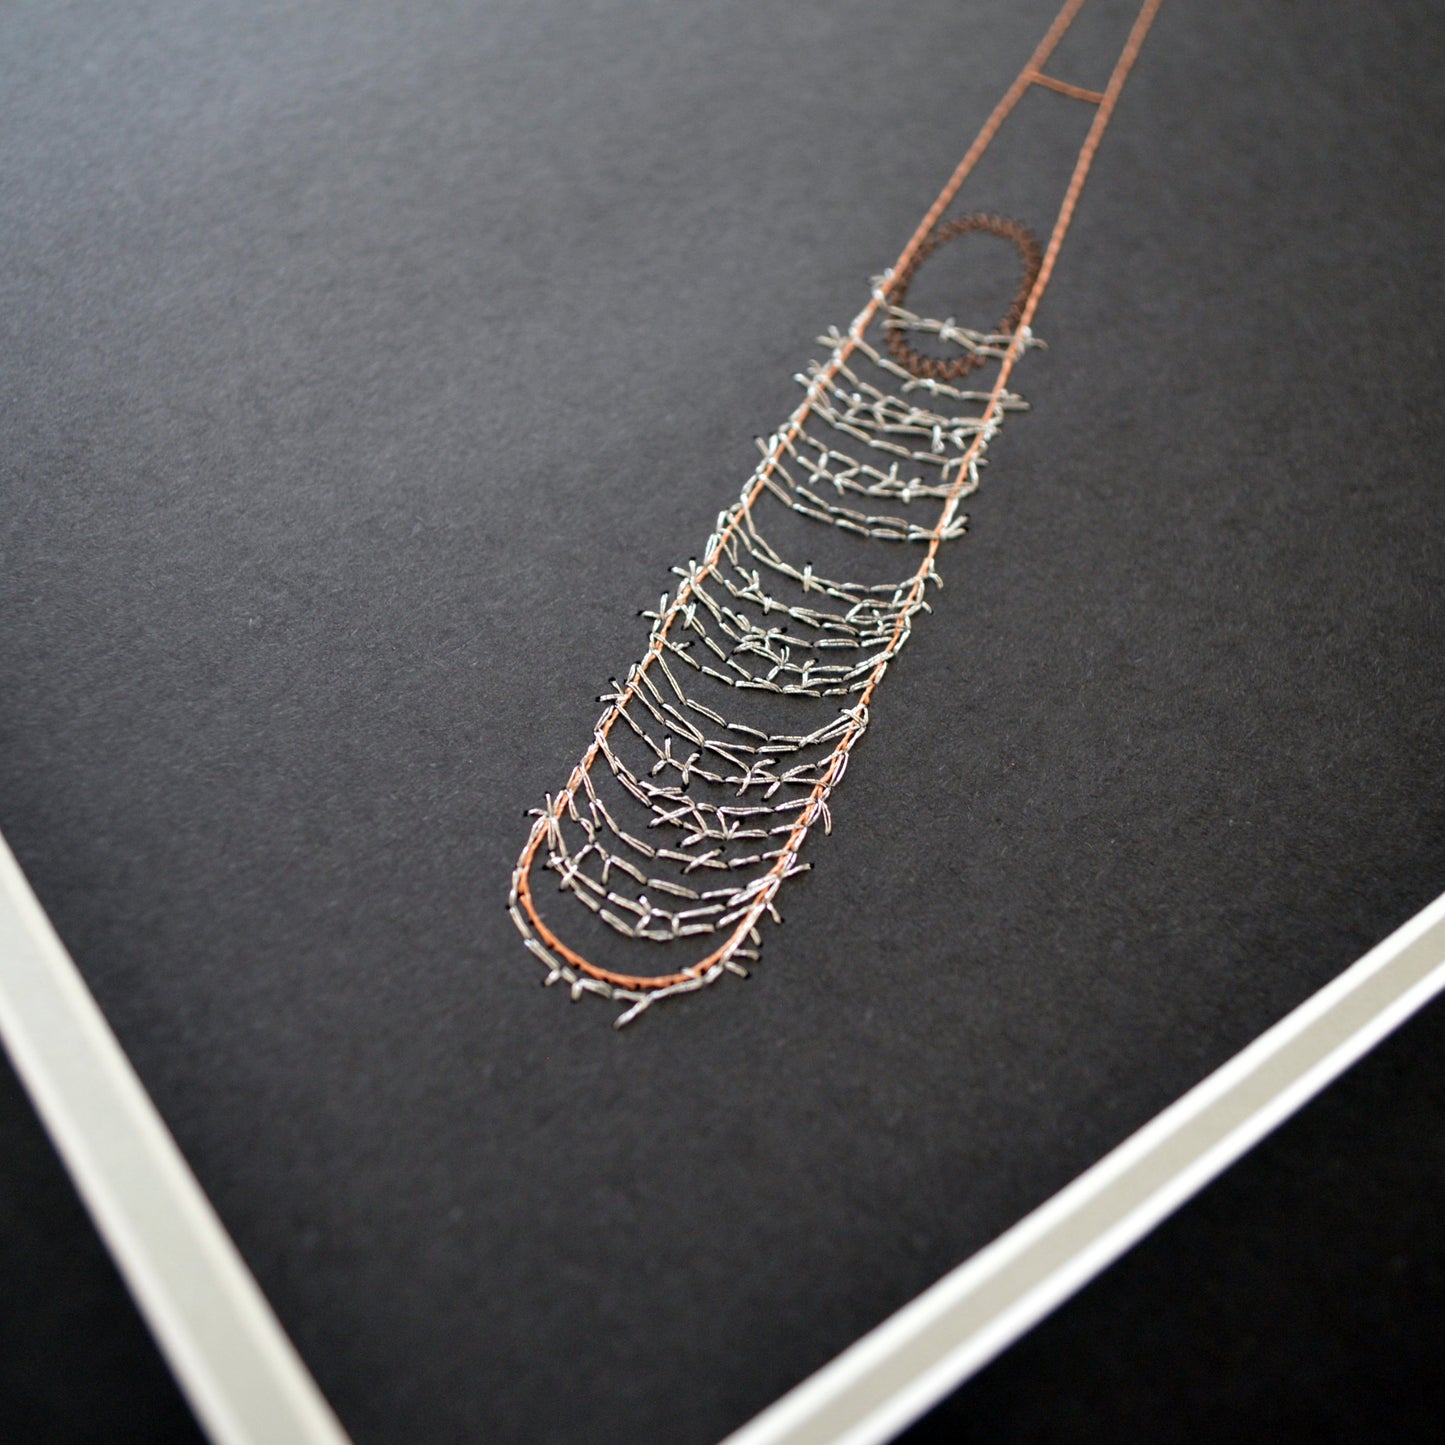 Lucille (The Walking Dead) Inspired Card Embroidery Kit (Black Card)